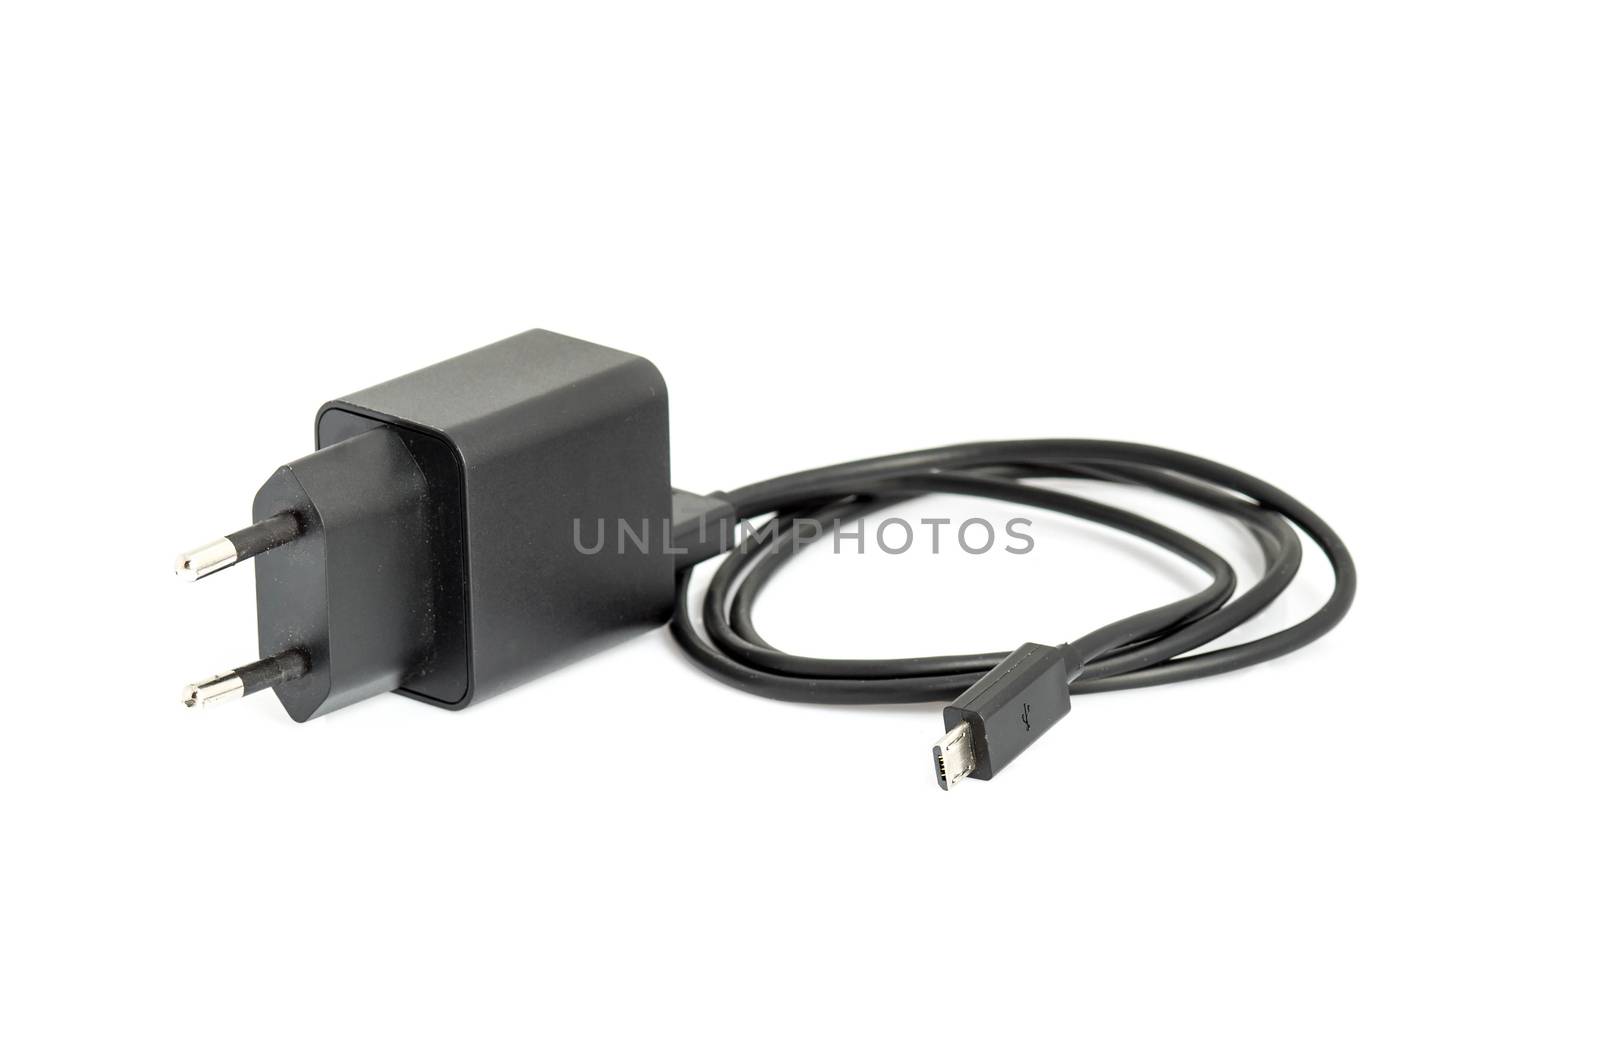 Charger for usb devices with micro usb cable.